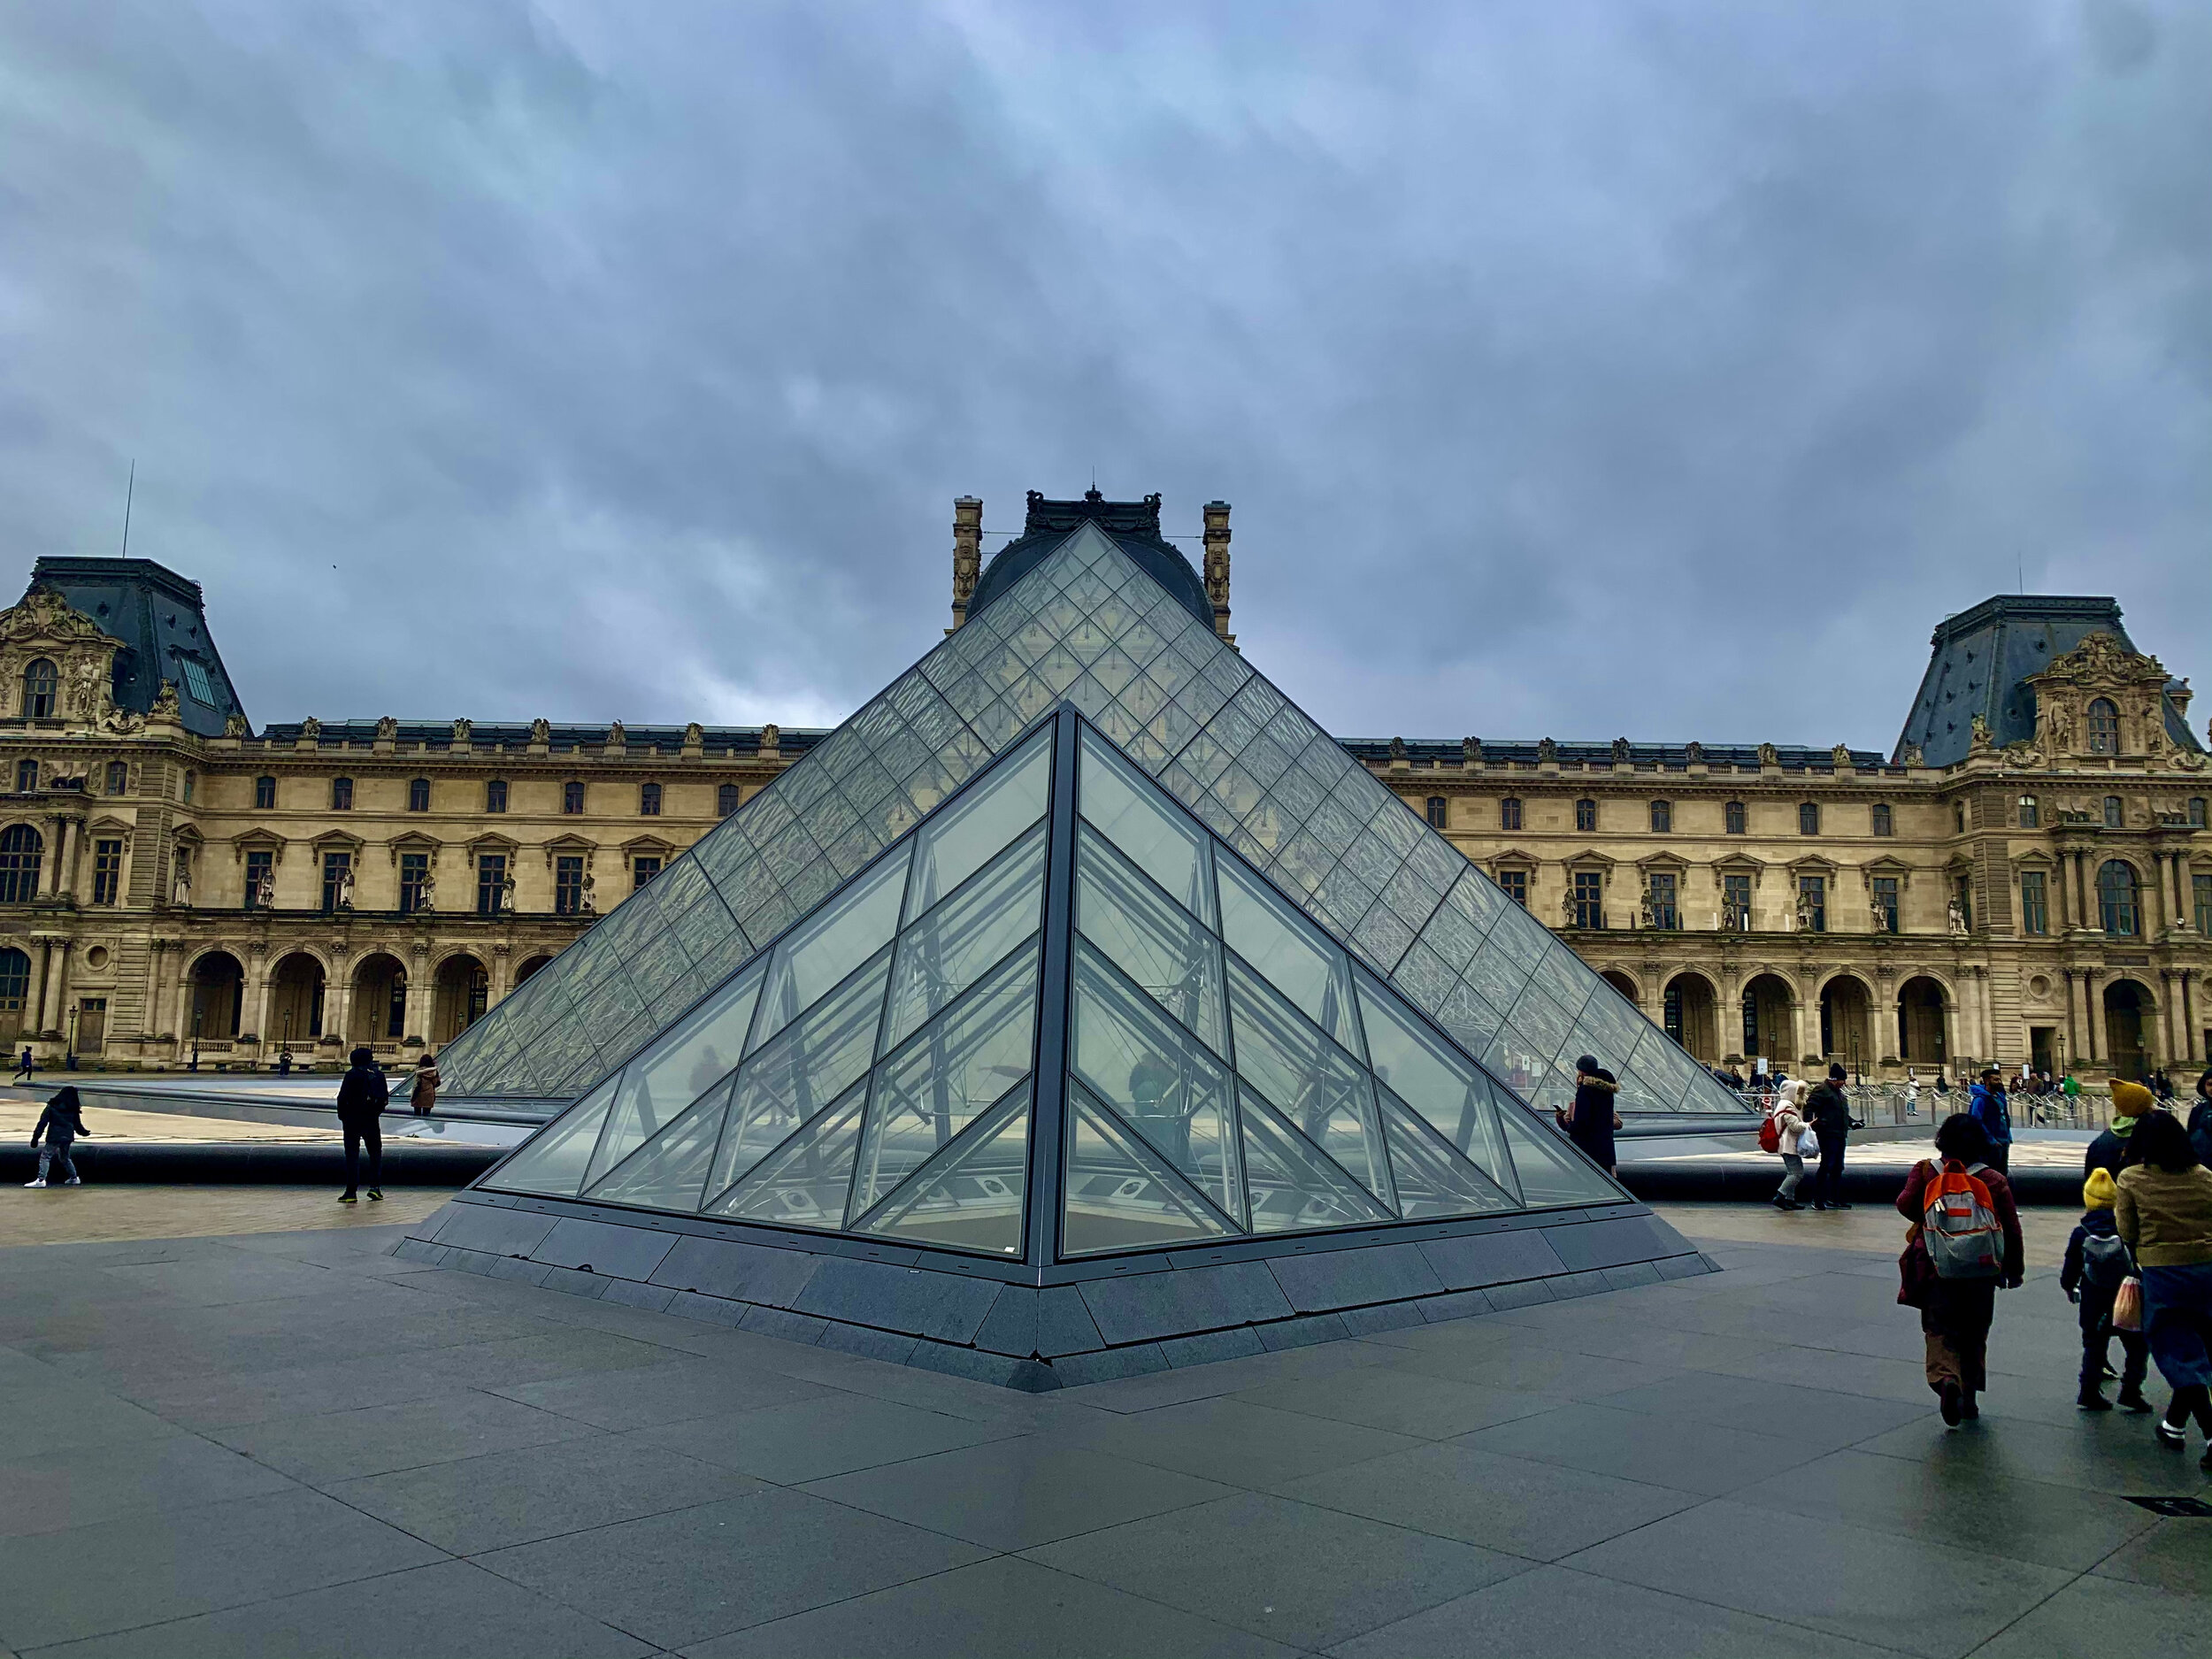  I. M. Pei’s famous glass pyramid at the Louvre. In the tourist guides it’s recommended  not  to take this entrance due to the long lines. But as my visit was in late February, COVID-19 had begun to became the subject of popular discussion throughout